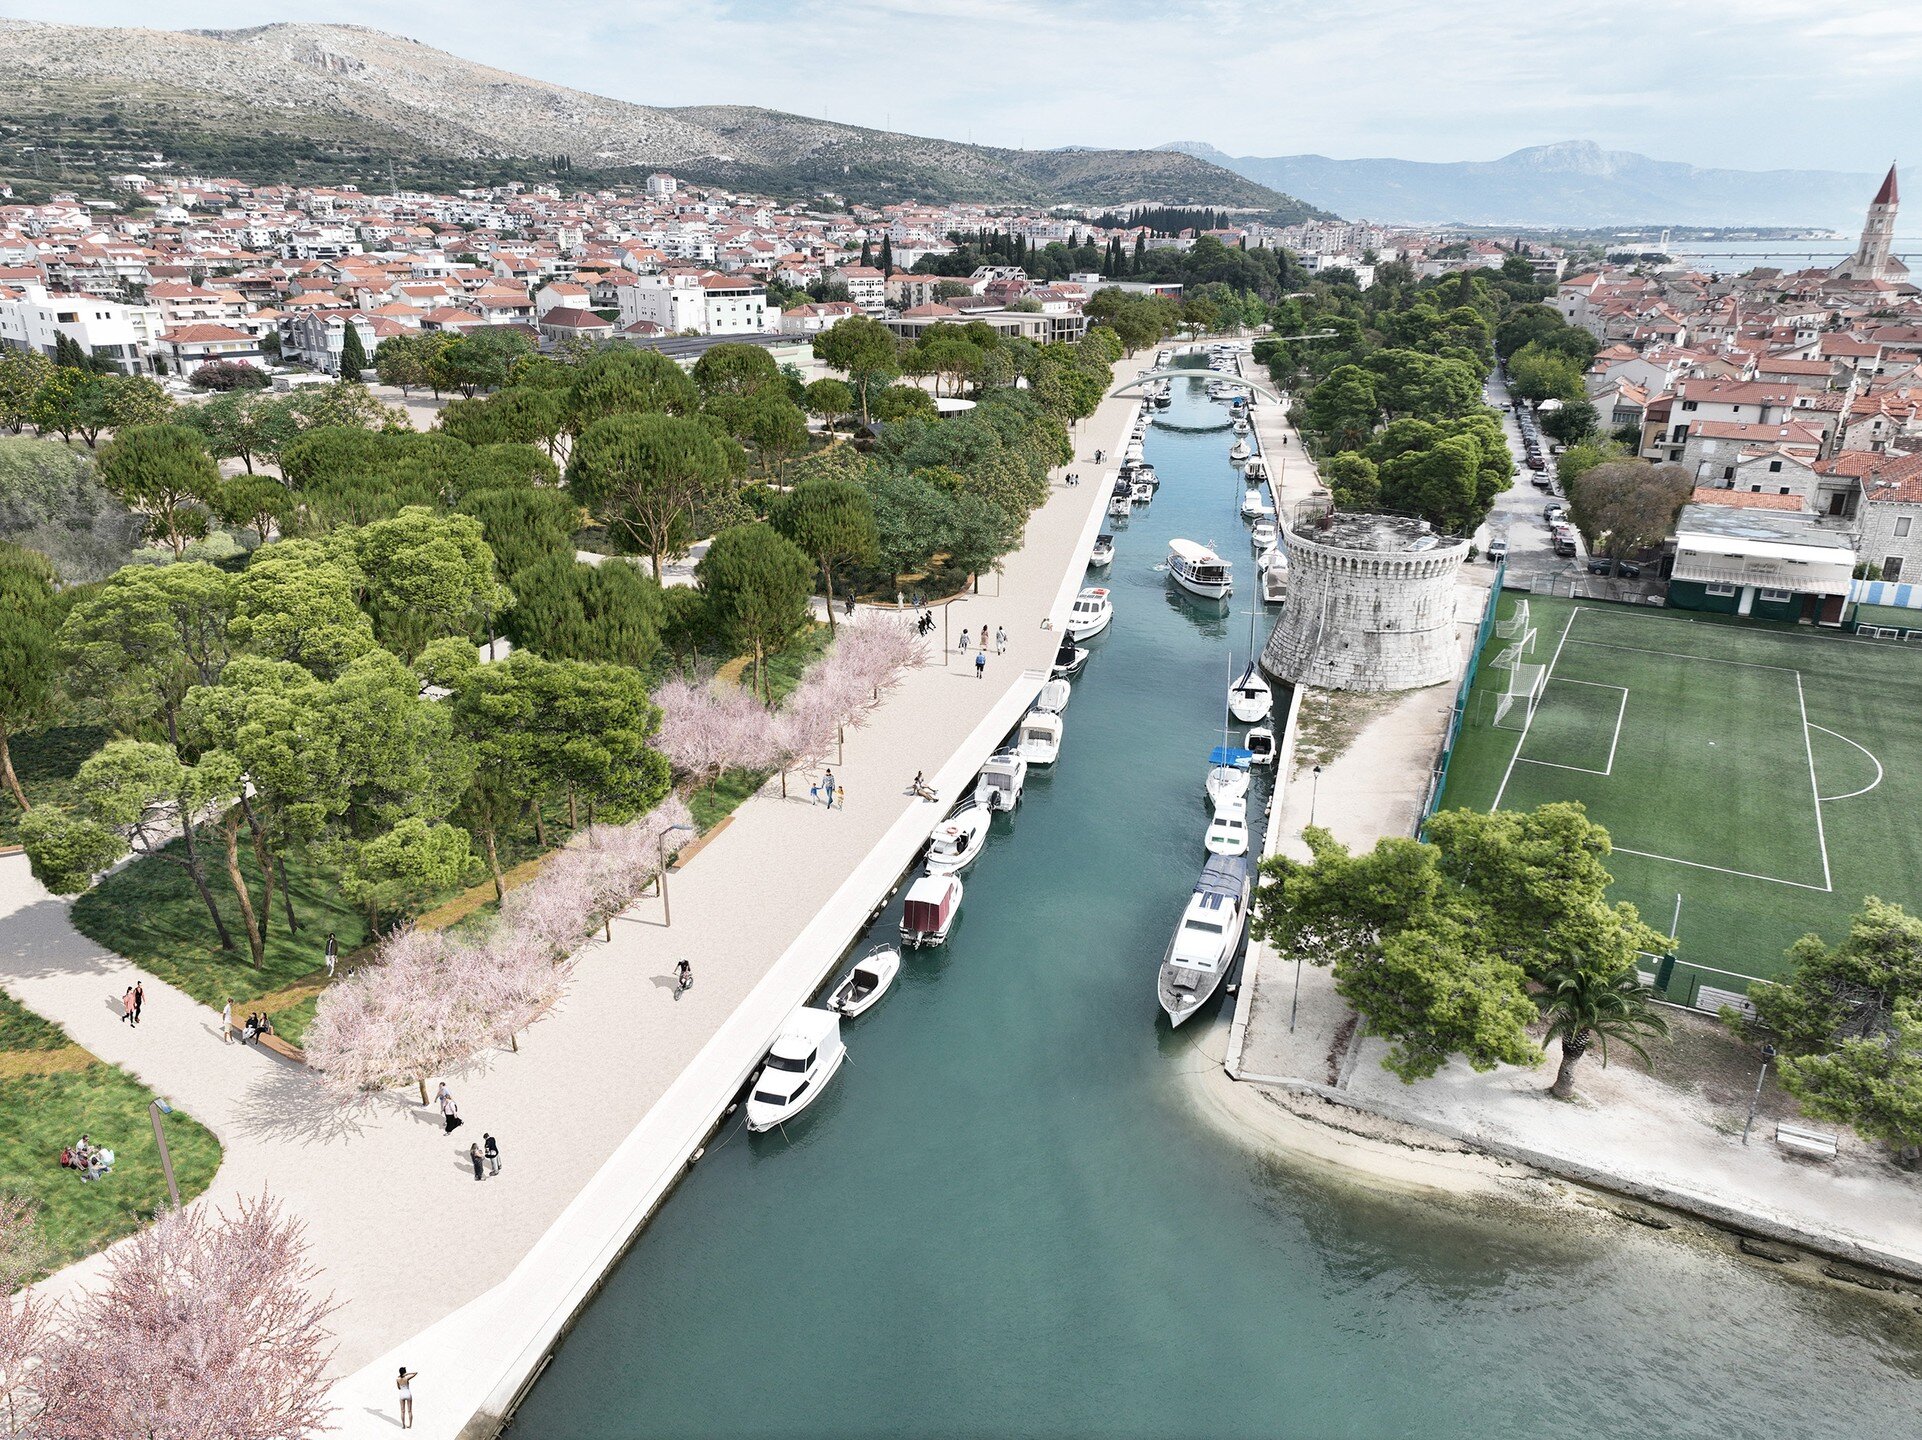 1st prize in a competition for the redevelopment of Soline and Travarica area in Trogir, with Stanislava Odrljin @stanaodrljin and Carla Coromina Cabeceran

Author: MVA/Mikelić Vre&scaron; Arhitekti; Studio SOL (landscape) Project team: Marin Mikelić